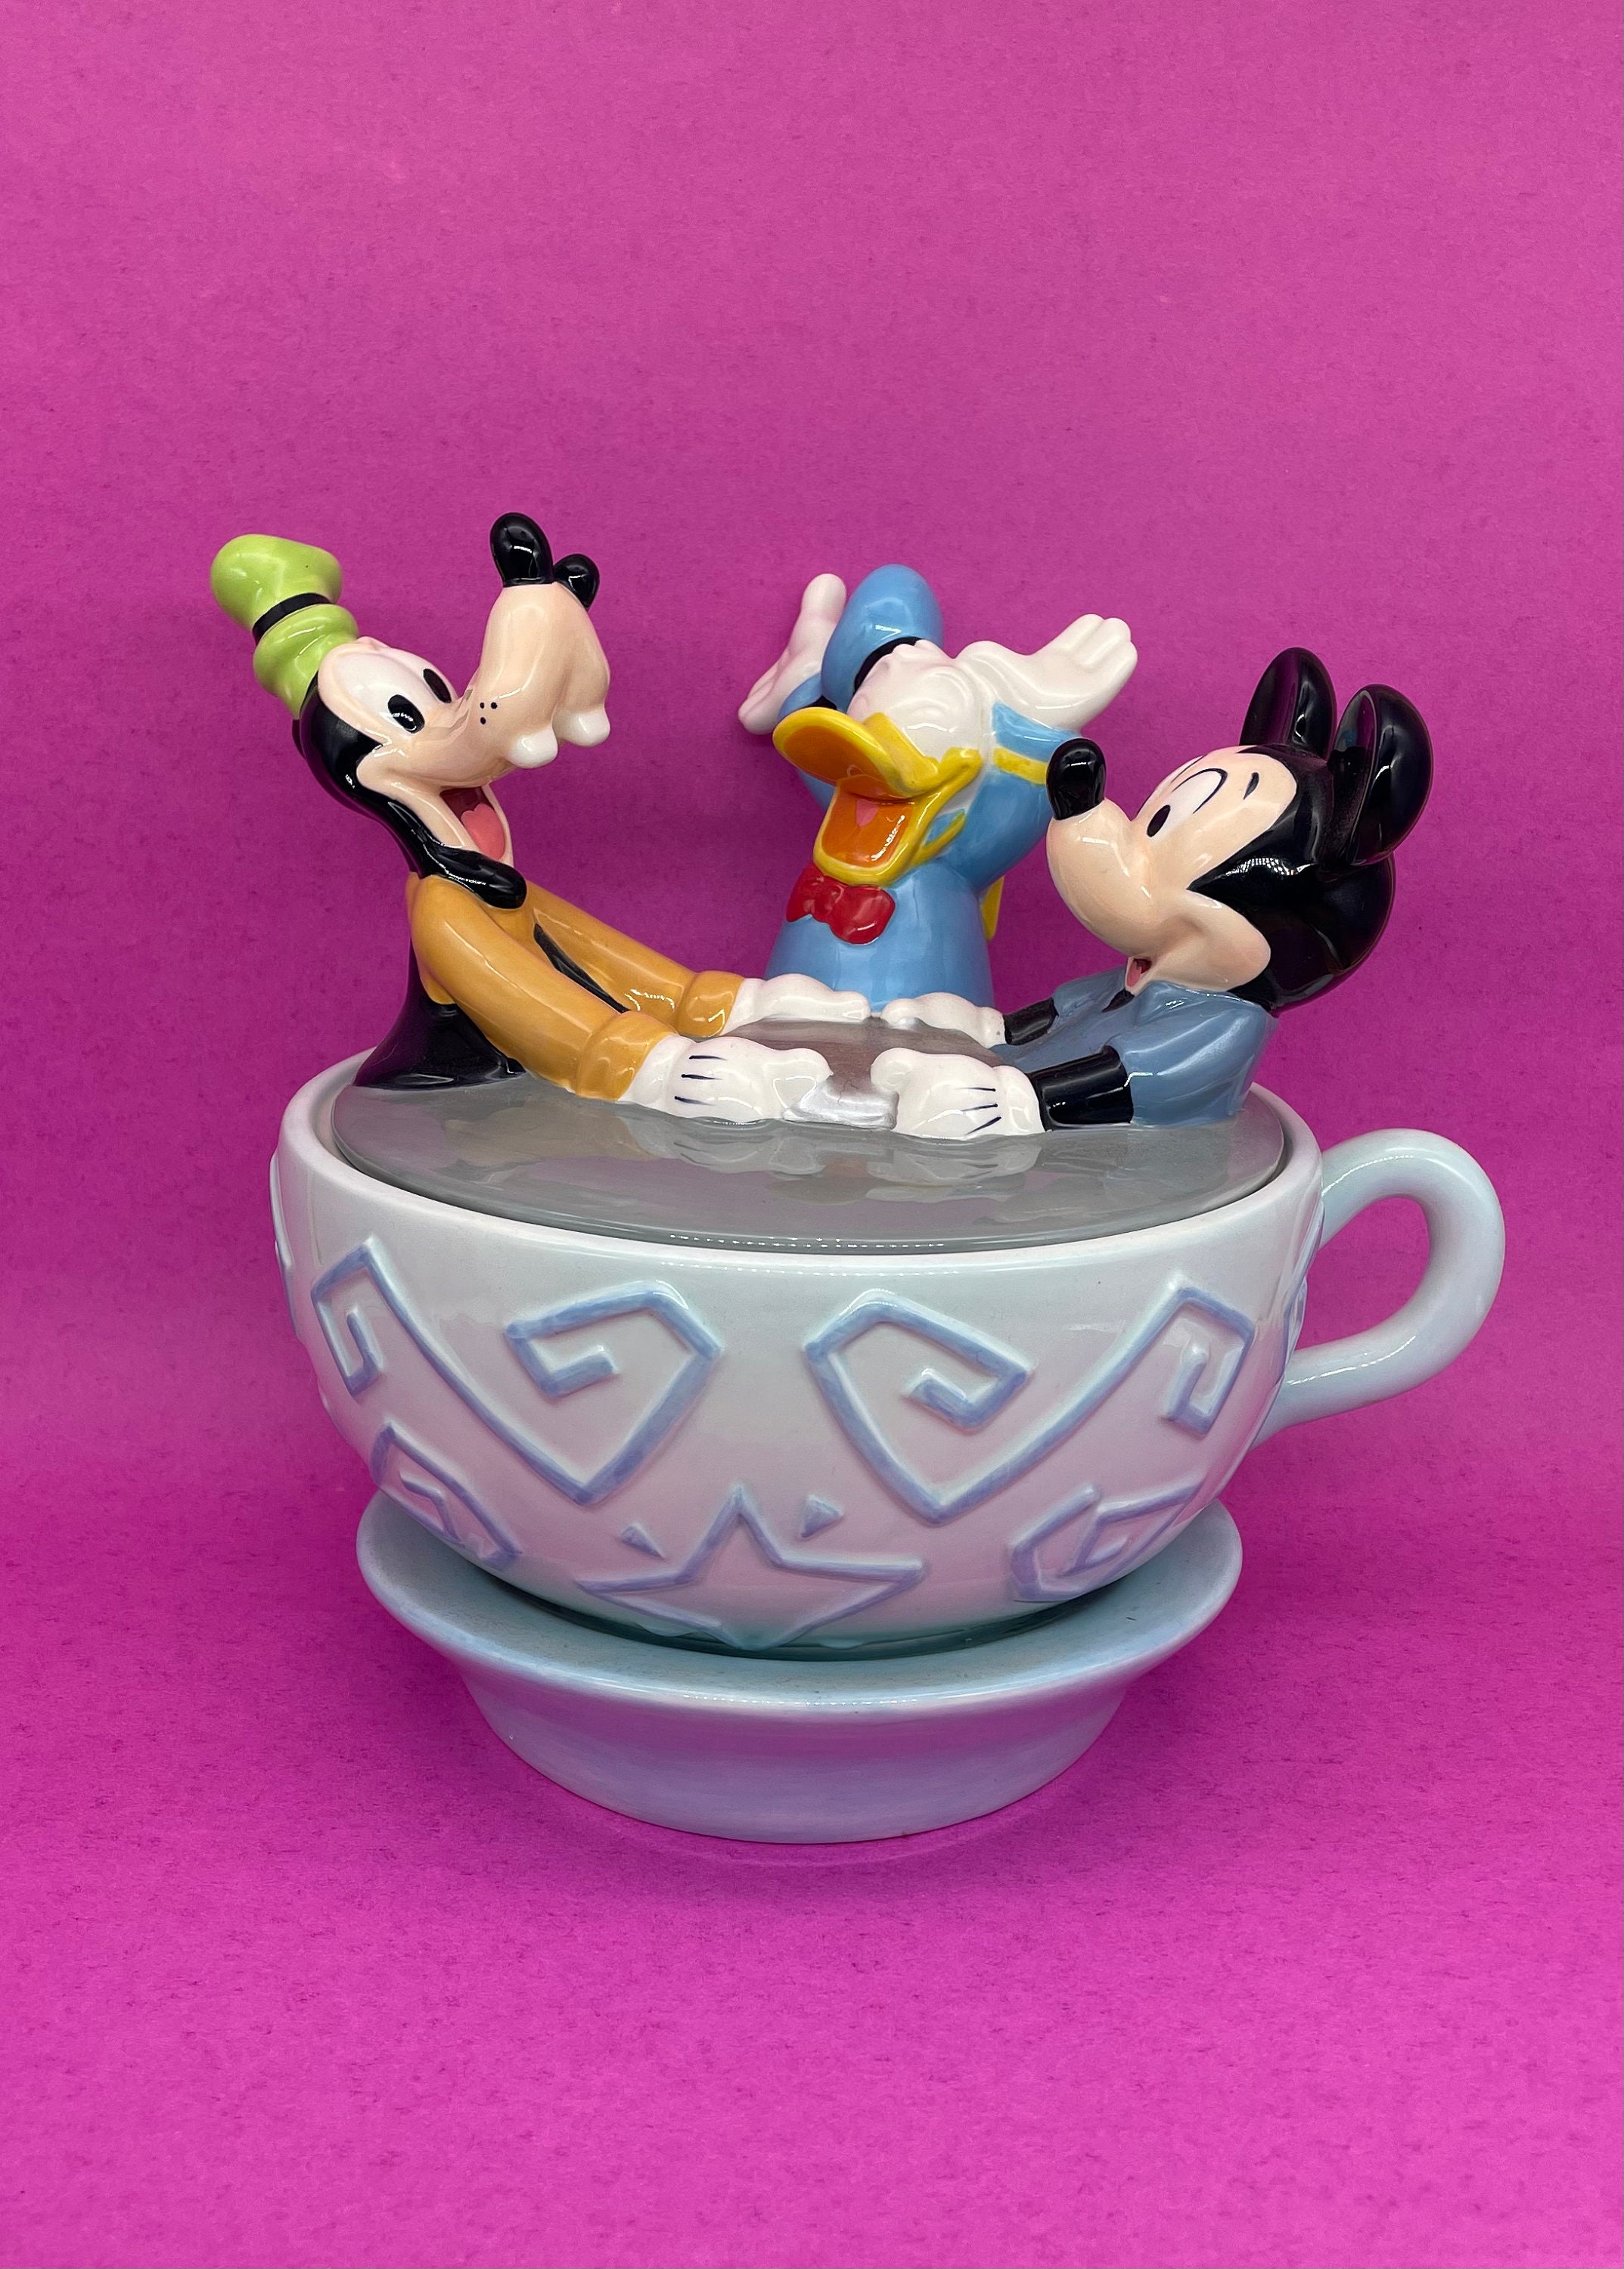 Disney Store Exclusive Minnie Mouse Extra Large Coffee Cup Mug with Sassy  Minnie Mouse 24 Oz Black Pink Polka Dot Coffee Cup Mug from Disney Store  Sassy Minnie Mouse Black Coffee Cup